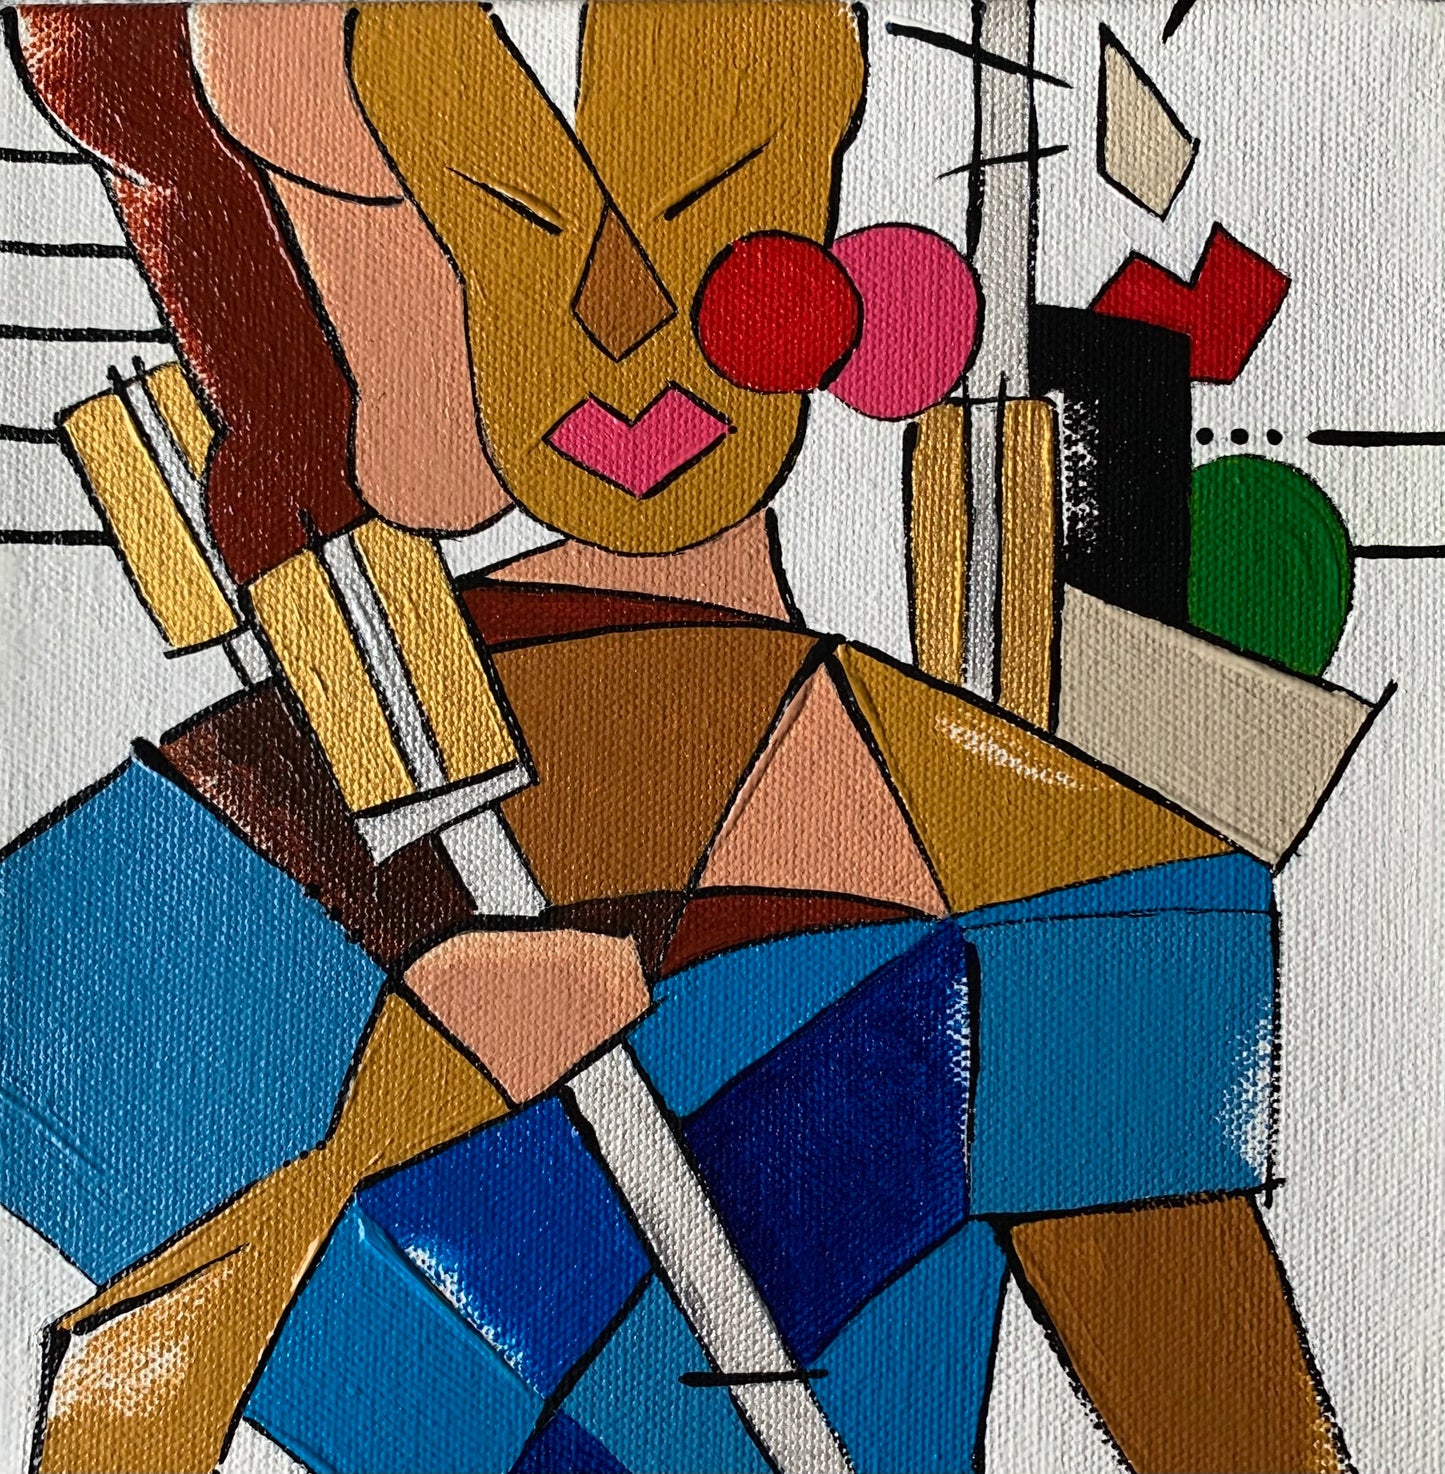 Bits 'n Pieces on Canvas Series | Jazz Singer